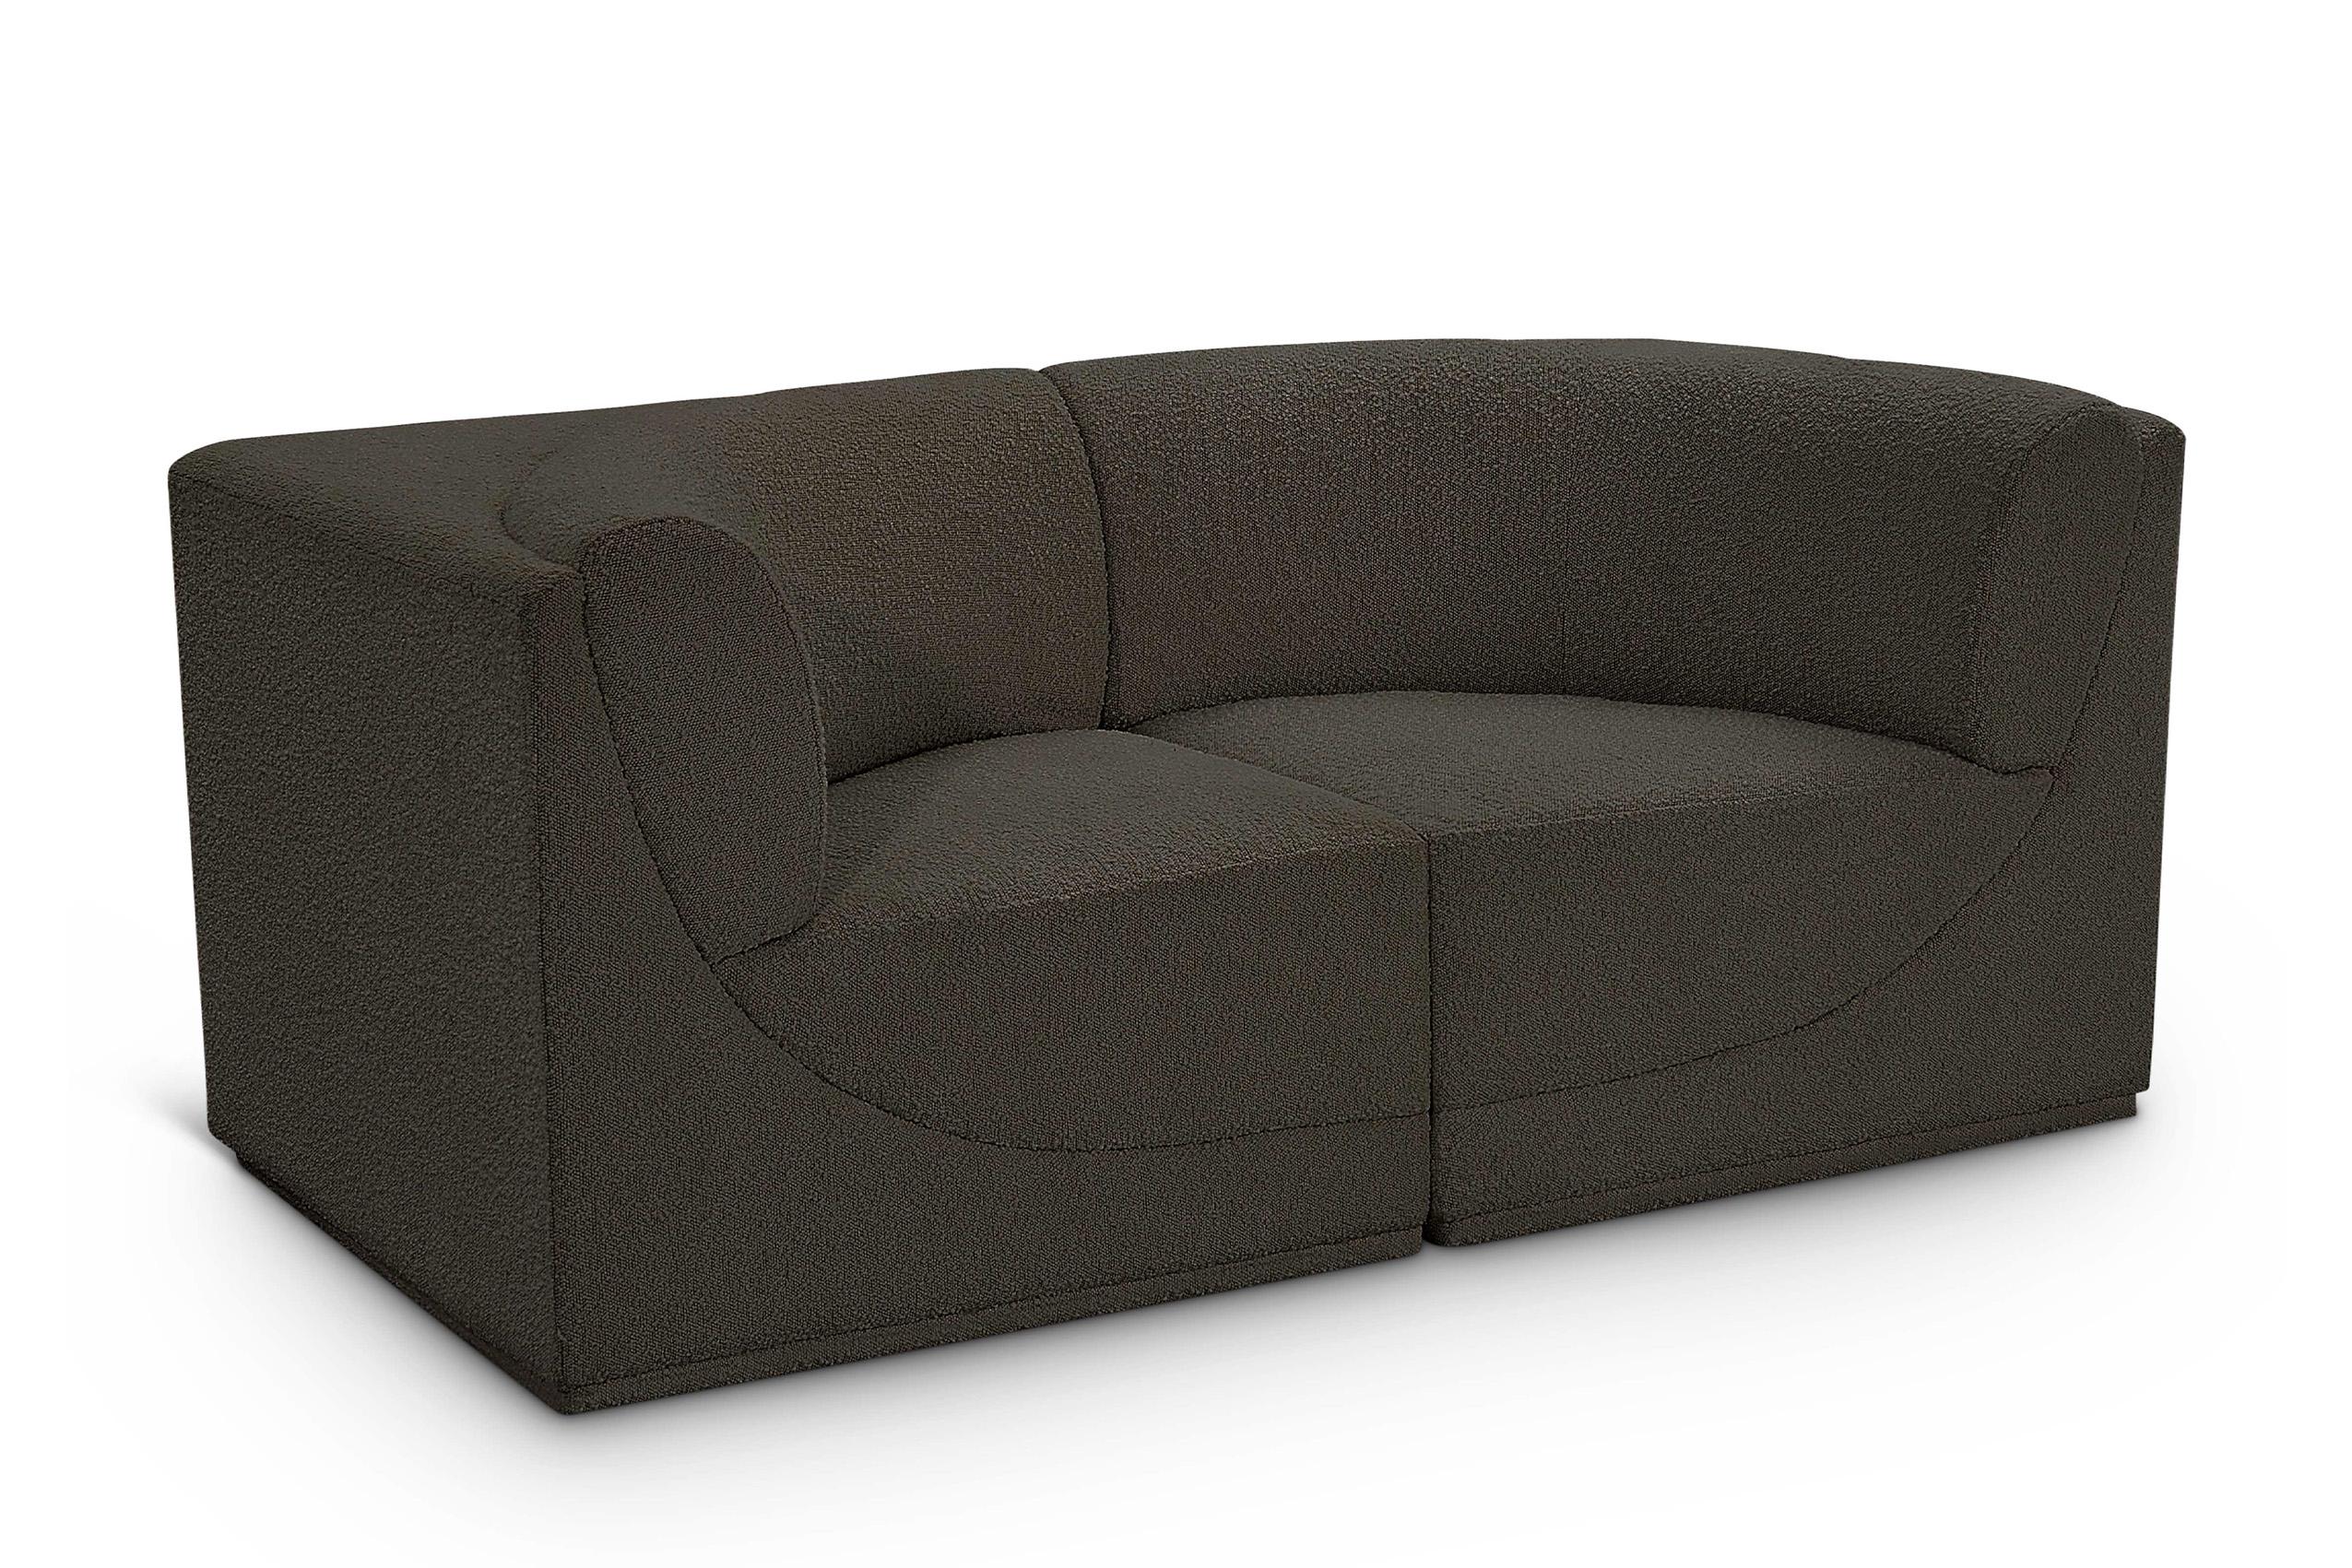 Contemporary, Modern Modular Sofa Ollie 118Brown-S68 118Brown-S68 in Brown 